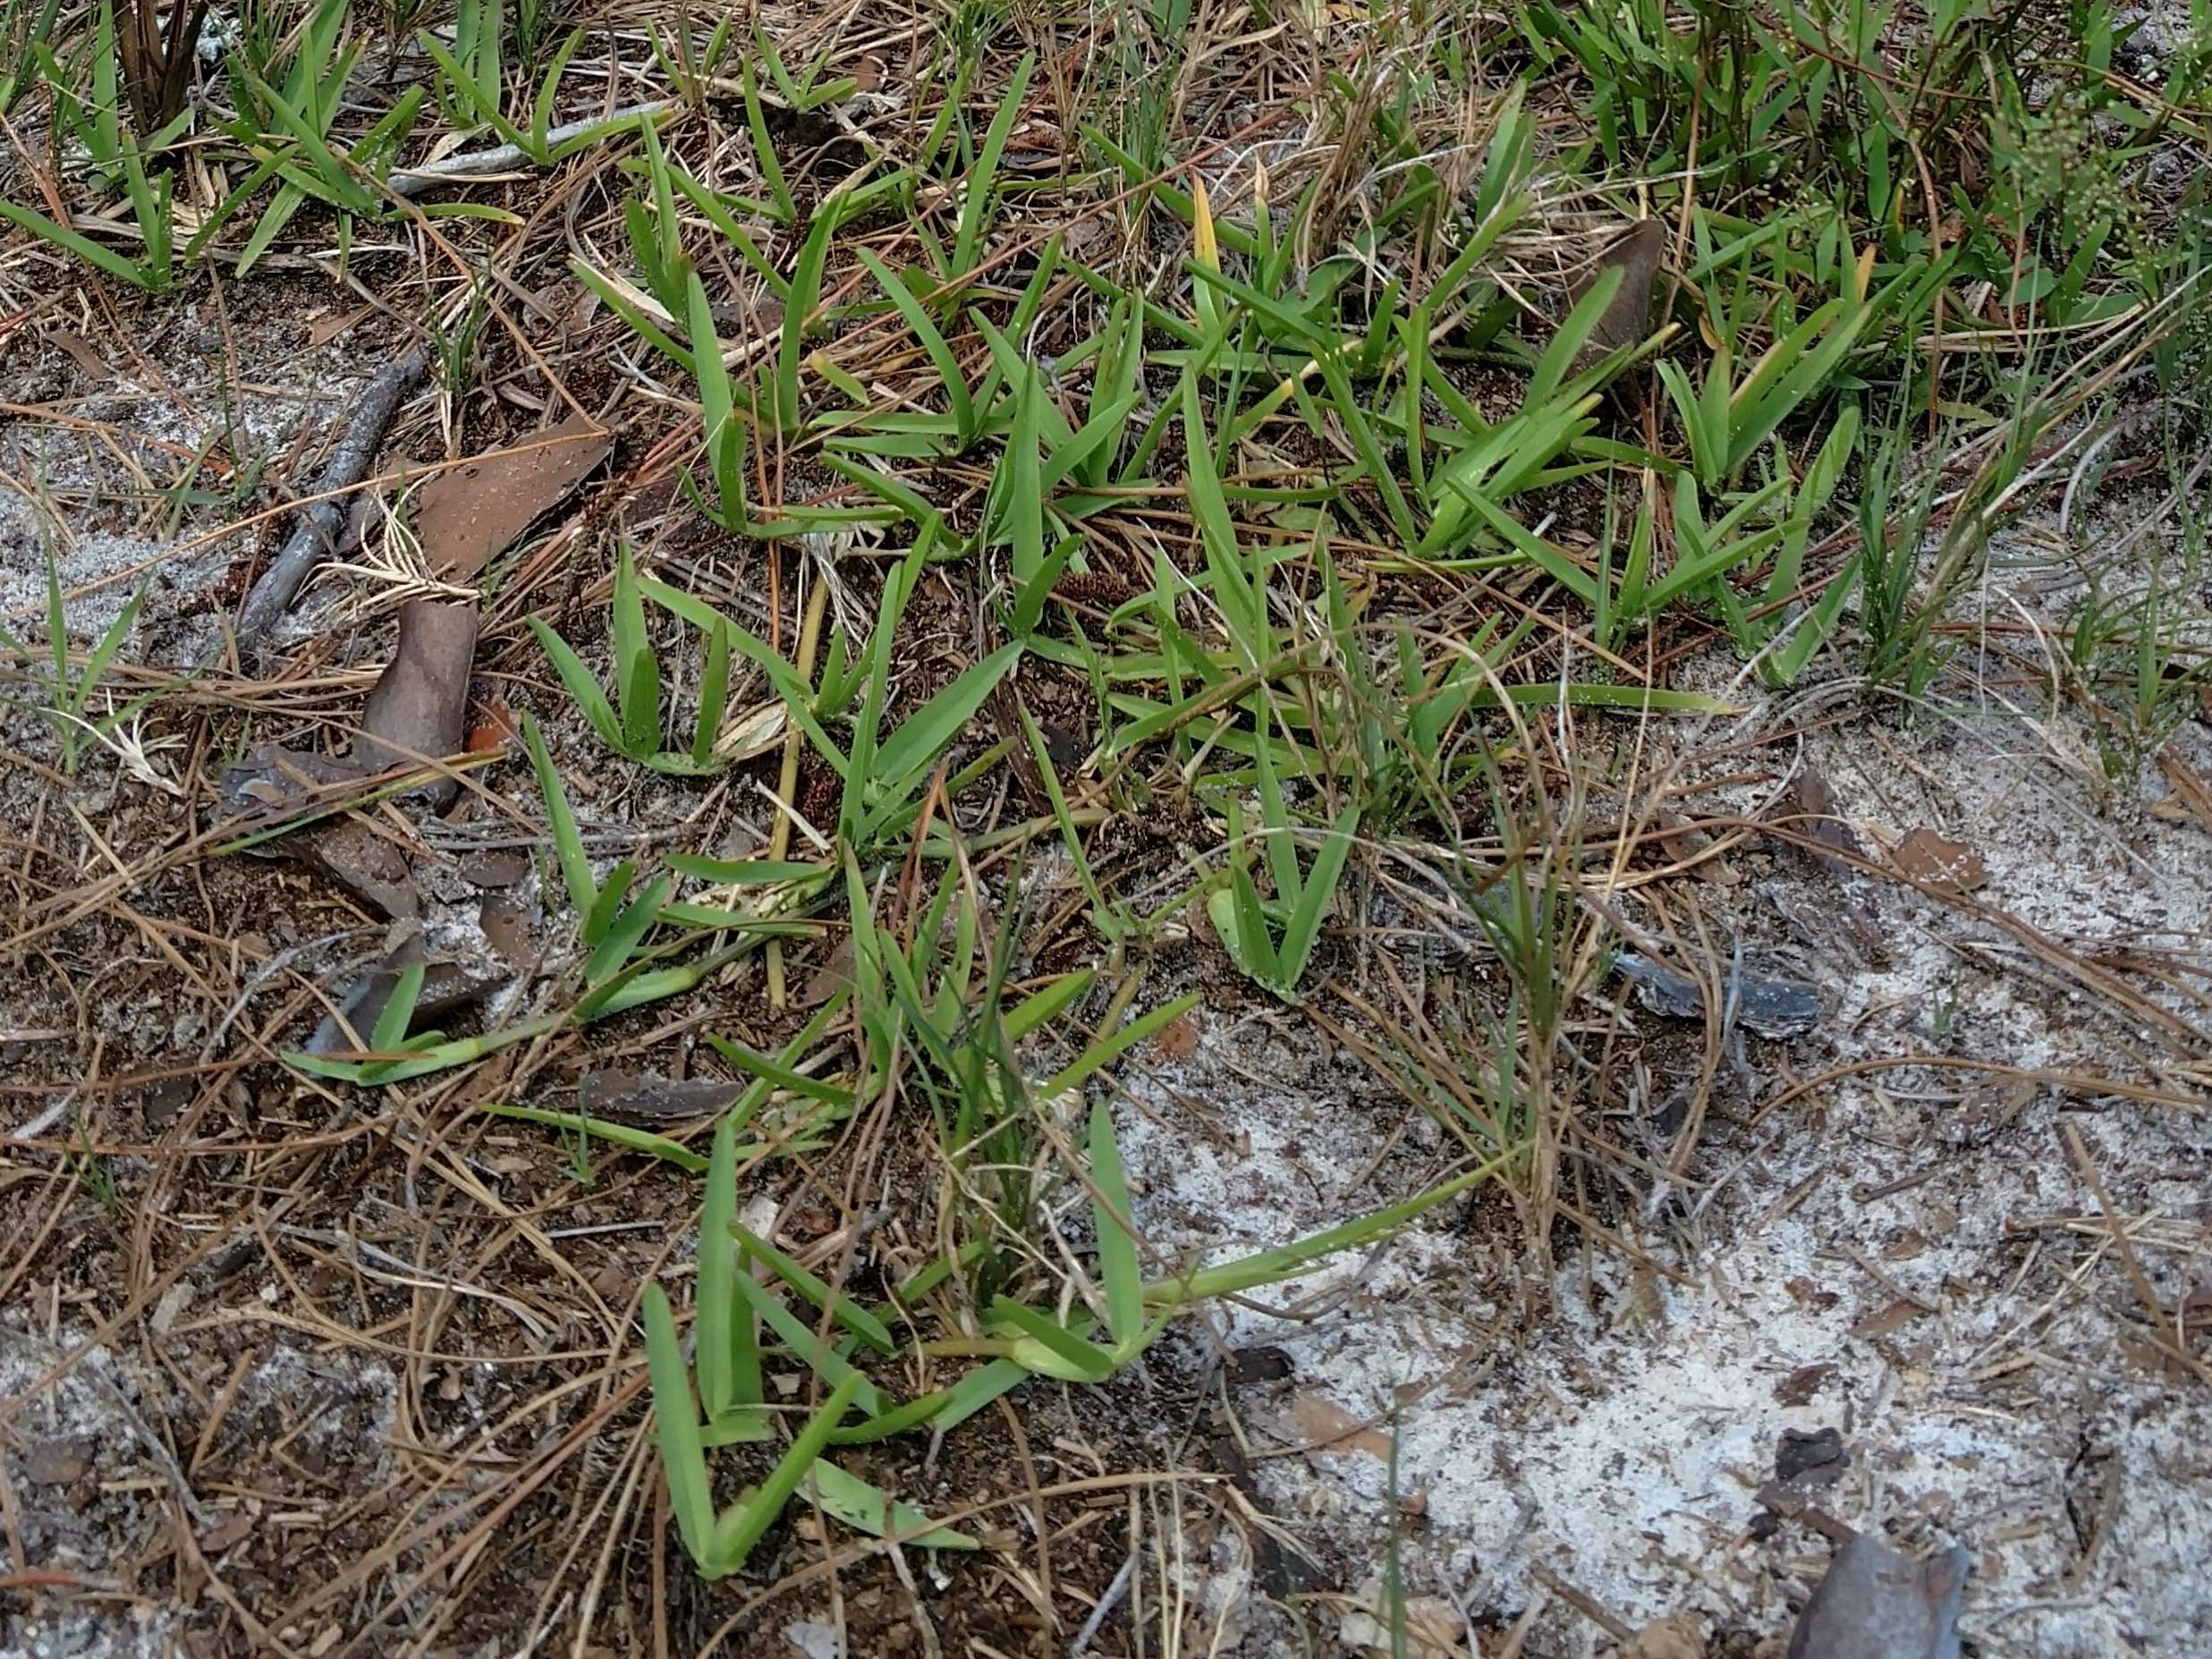 The Scientific Name is Stenotaphrum secundatum. You will likely hear them called St. Augustine Grass, Carpet Grass, Charleston Grass, Buffalo Grass, Centipede Grass. This picture shows the Note the broad leaves and the creeping rhizomes. of Stenotaphrum secundatum